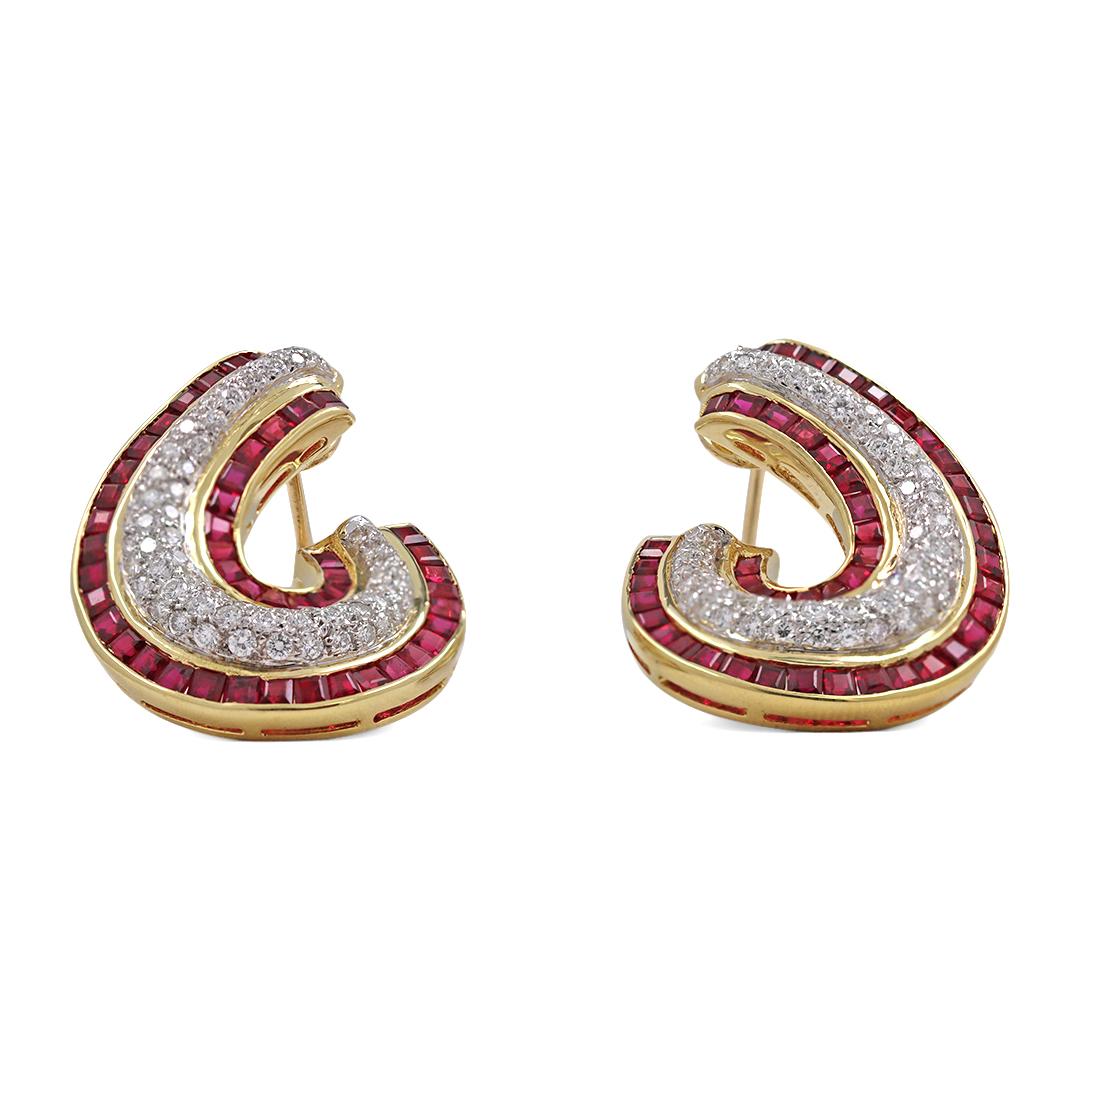 Vintage diamond and ruby front-to-back earrings crafted in 18 karat yellow gold. This classical design features two rows of bright red square cut natural rubies weighing an estimated 2.80 carats total weight adjacent to three rows of round brilliant